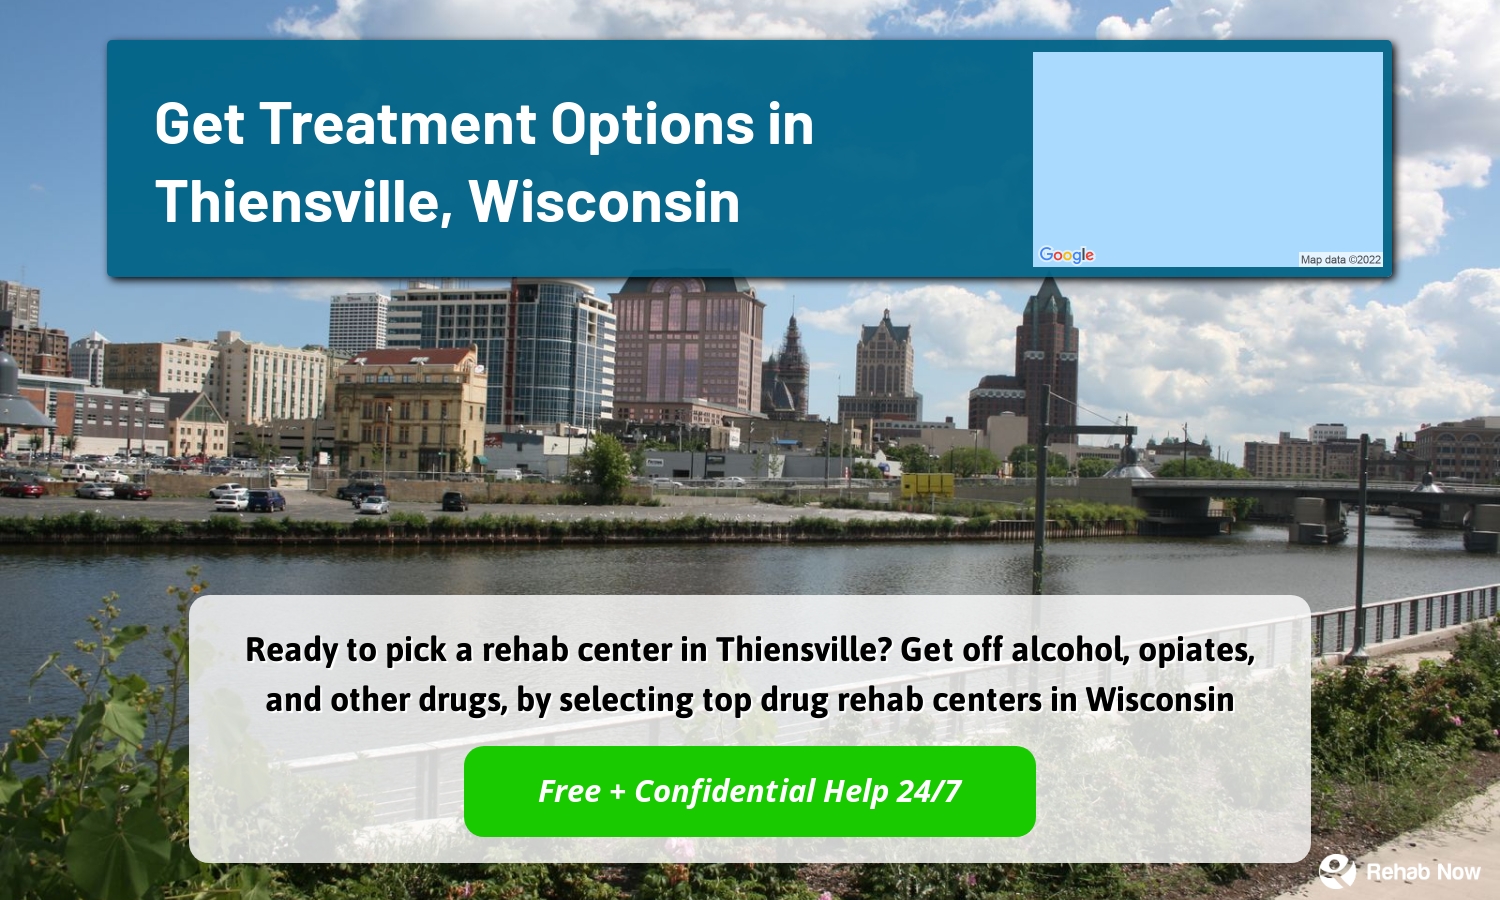 Ready to pick a rehab center in Thiensville? Get off alcohol, opiates, and other drugs, by selecting top drug rehab centers in Wisconsin